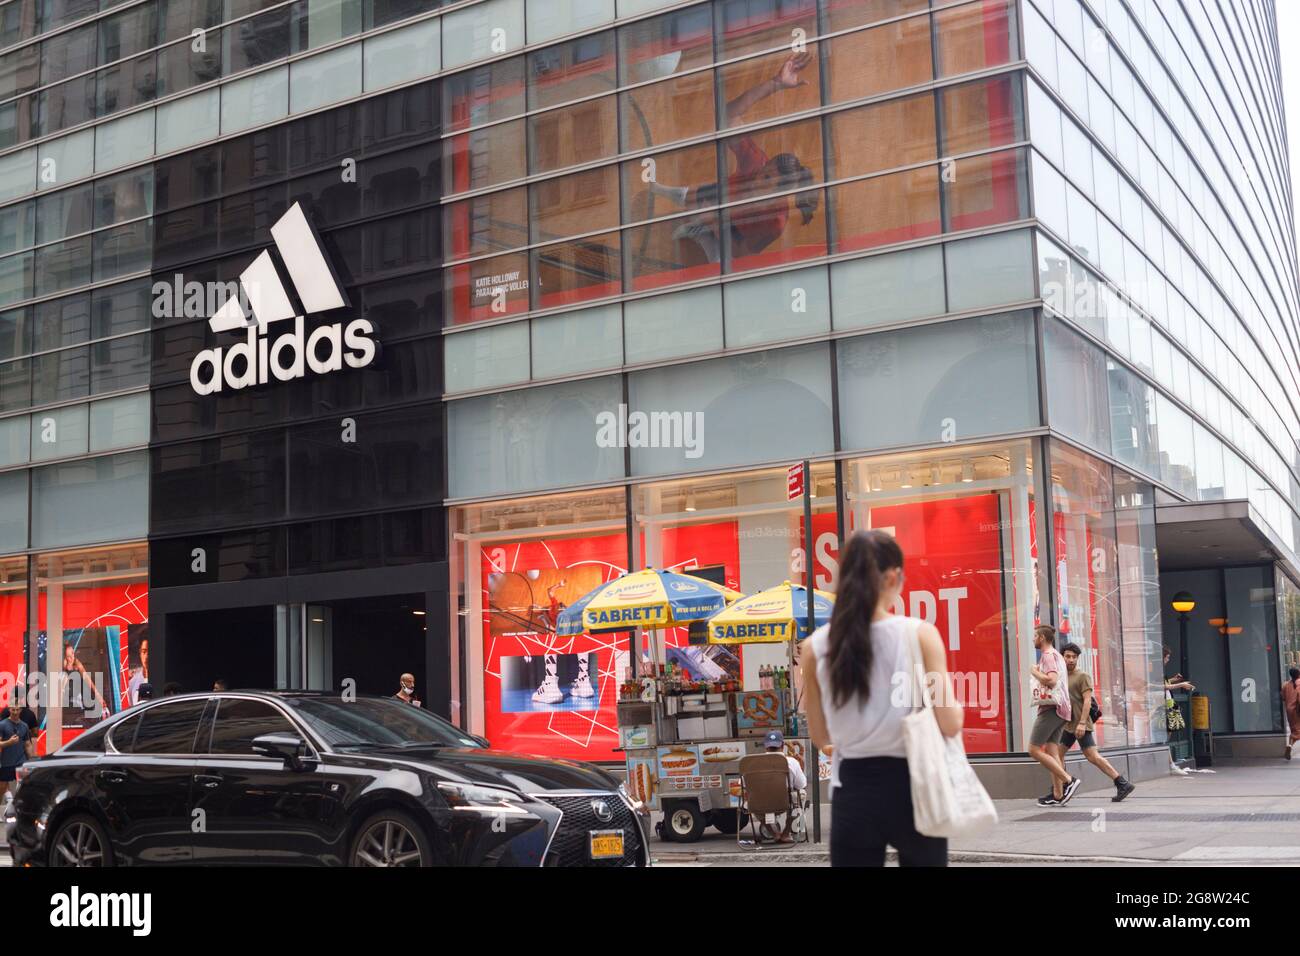 Adidas store front High Resolution Stock Photography and Images - Alamy